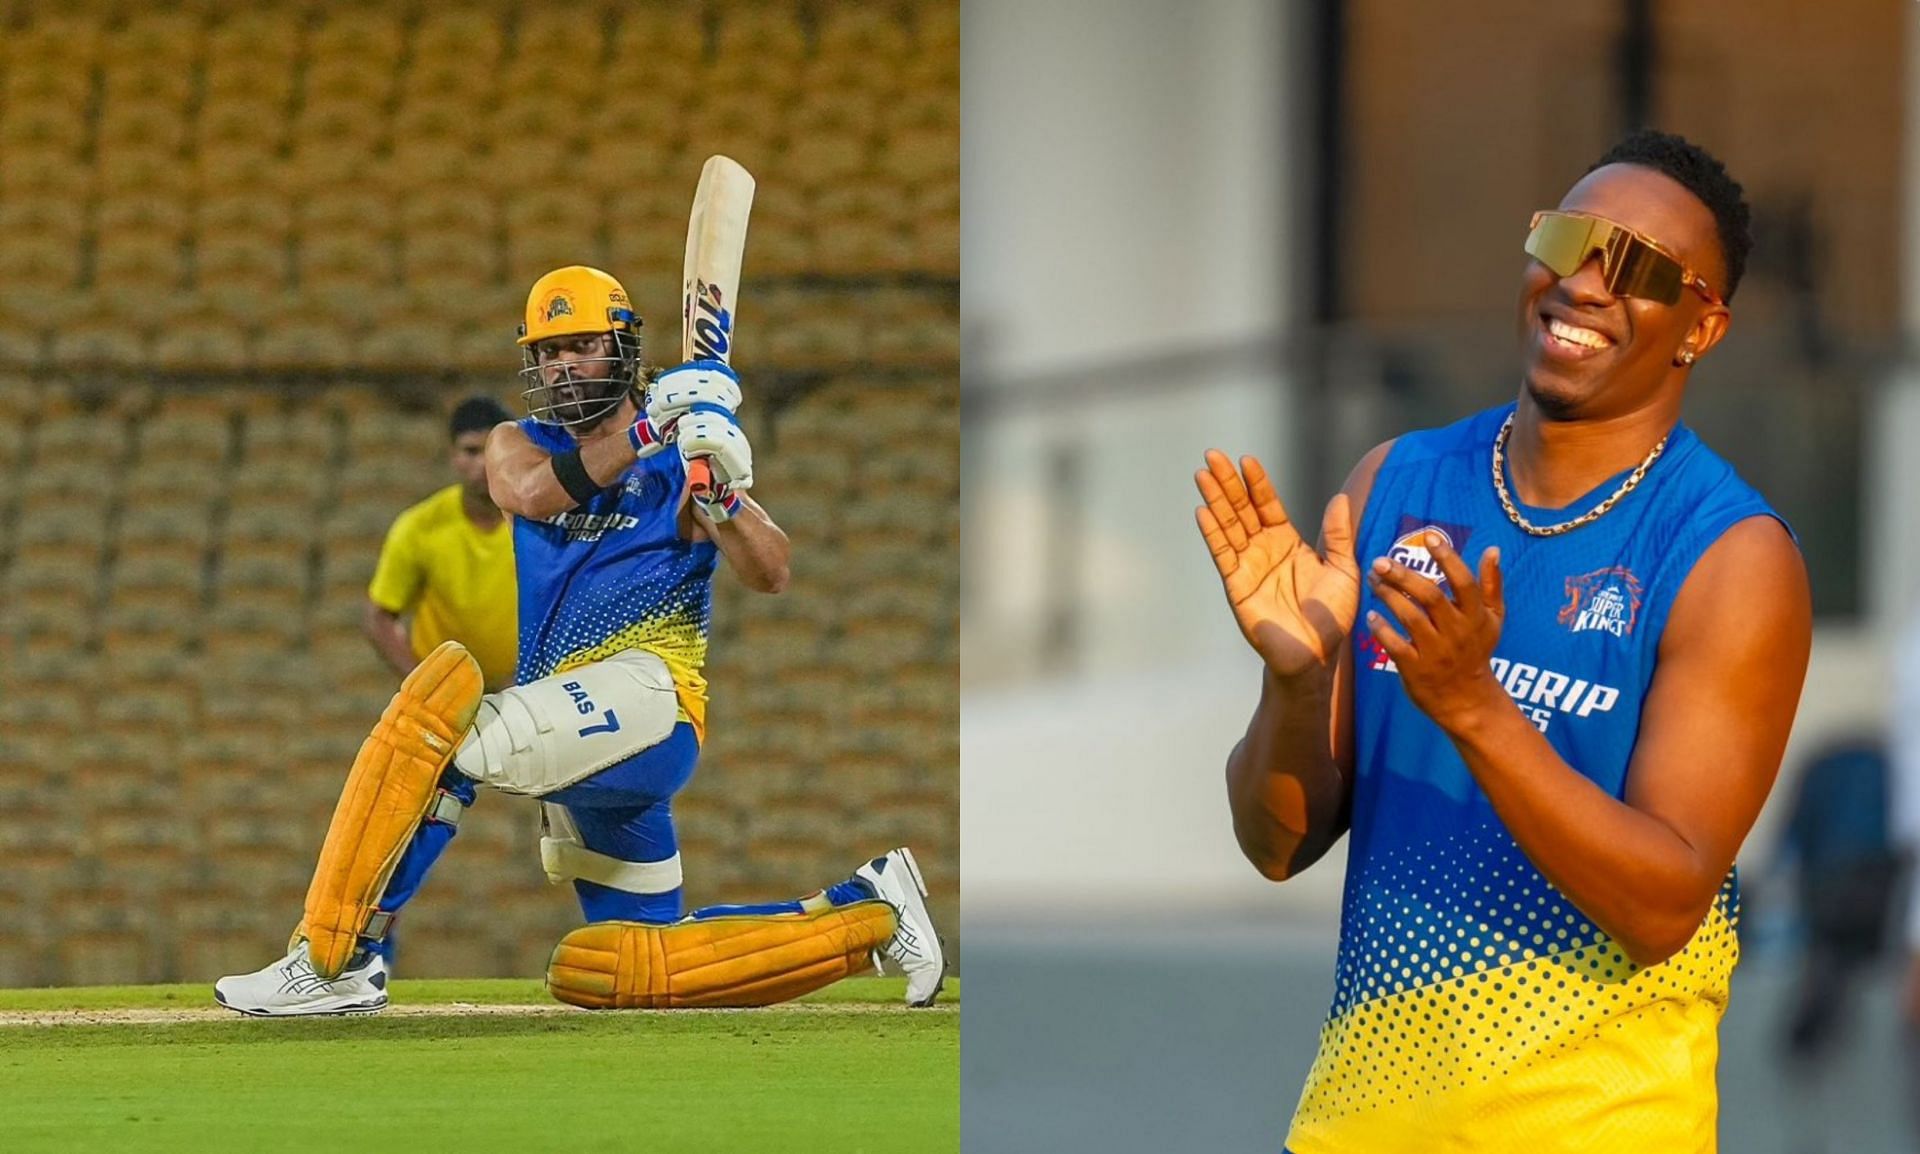 [Watch] MS Dhoni celebrates joyfully after hitting a 6 off Dwayne Bravo during CSK practice ahead of IPL 2024